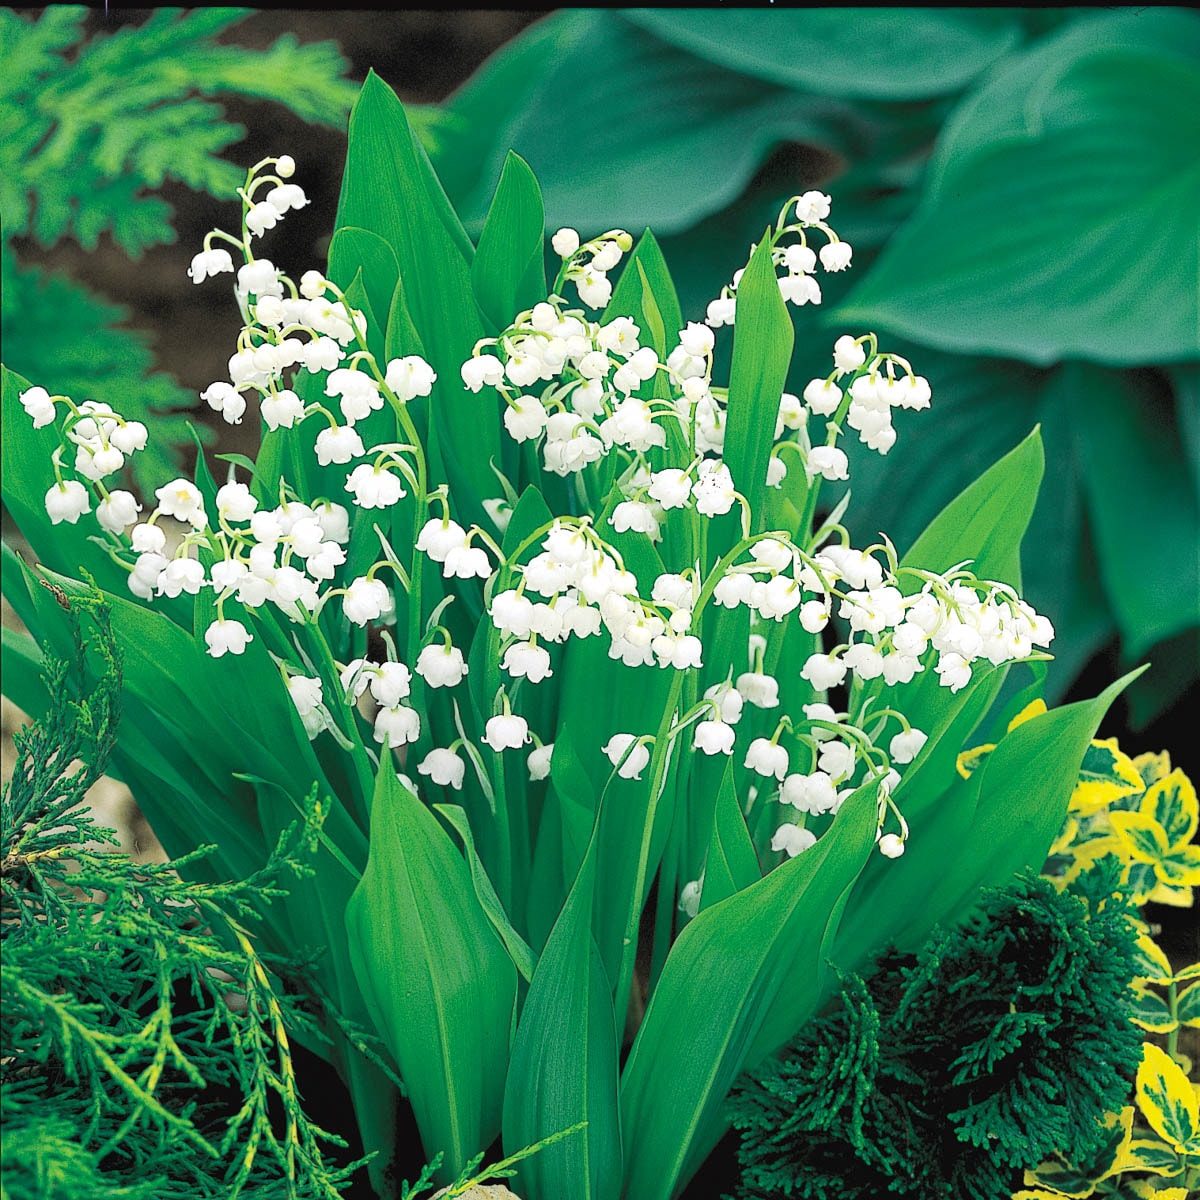 Lowe's White Lily Of The Valley Bulbs (L8114) Bagged 8-Count in